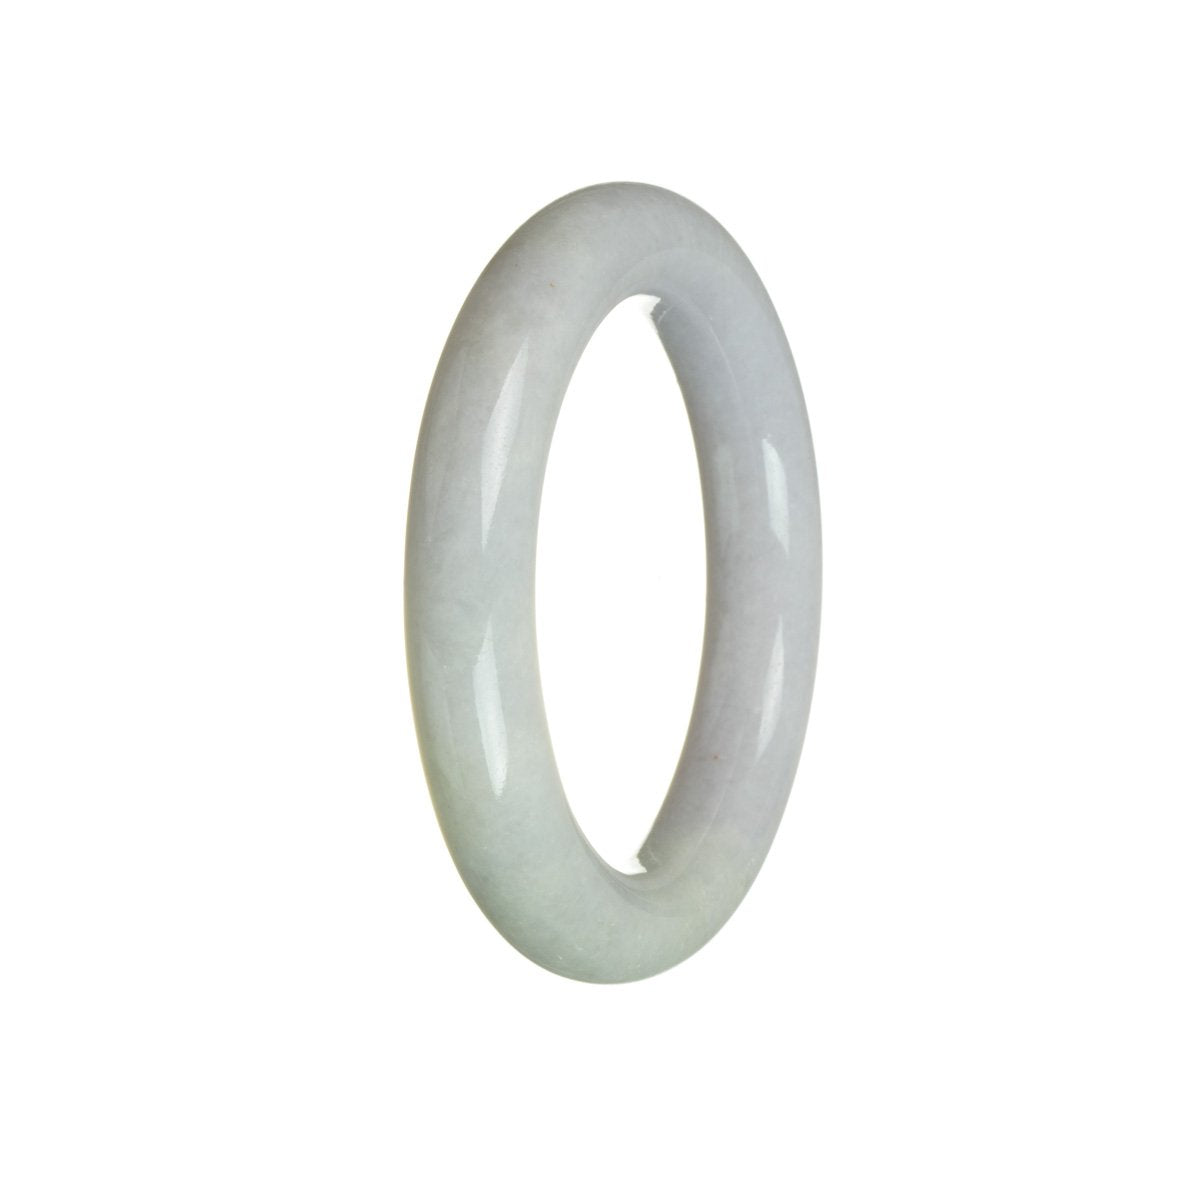 A round lavender and pale green jade bangle bracelet, perfect for adding a touch of elegance to any outfit.